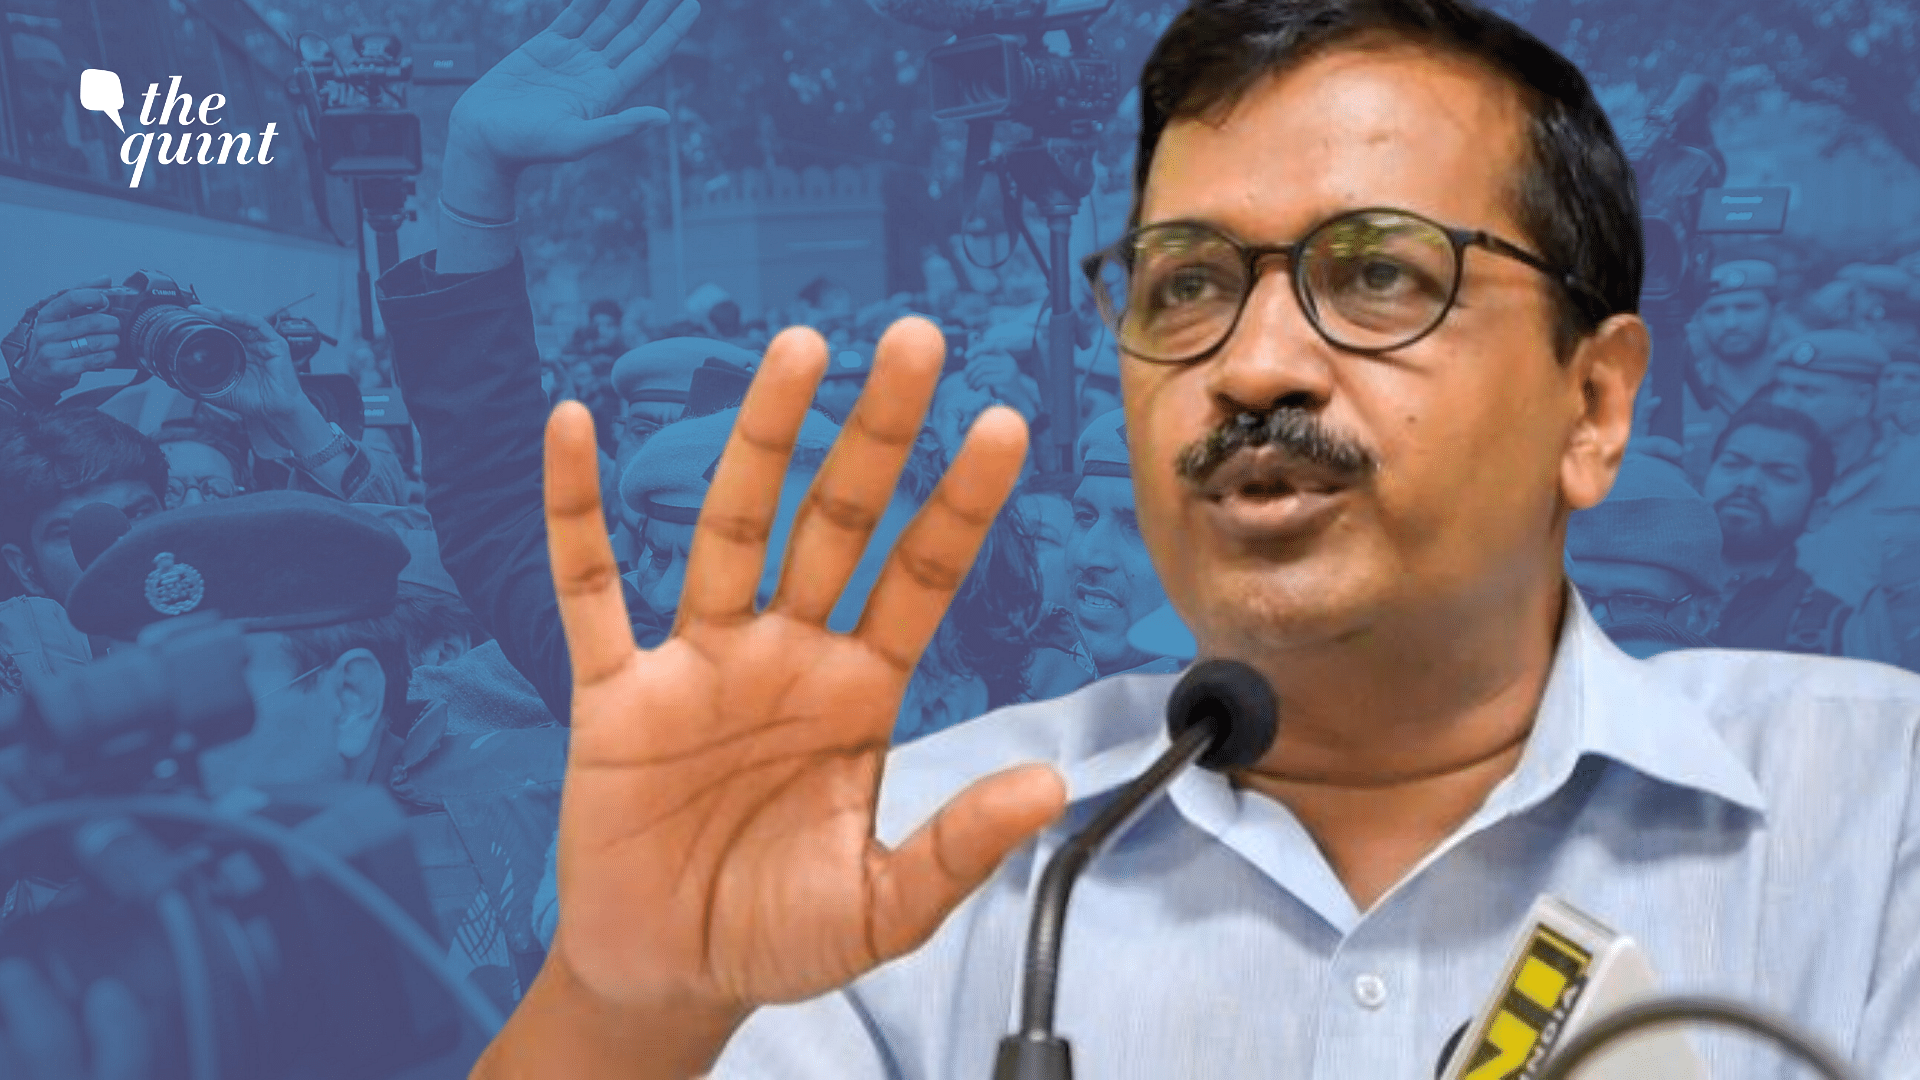 As services ‘suspended’ in Delhi, Kejriwal launches free WiFi.